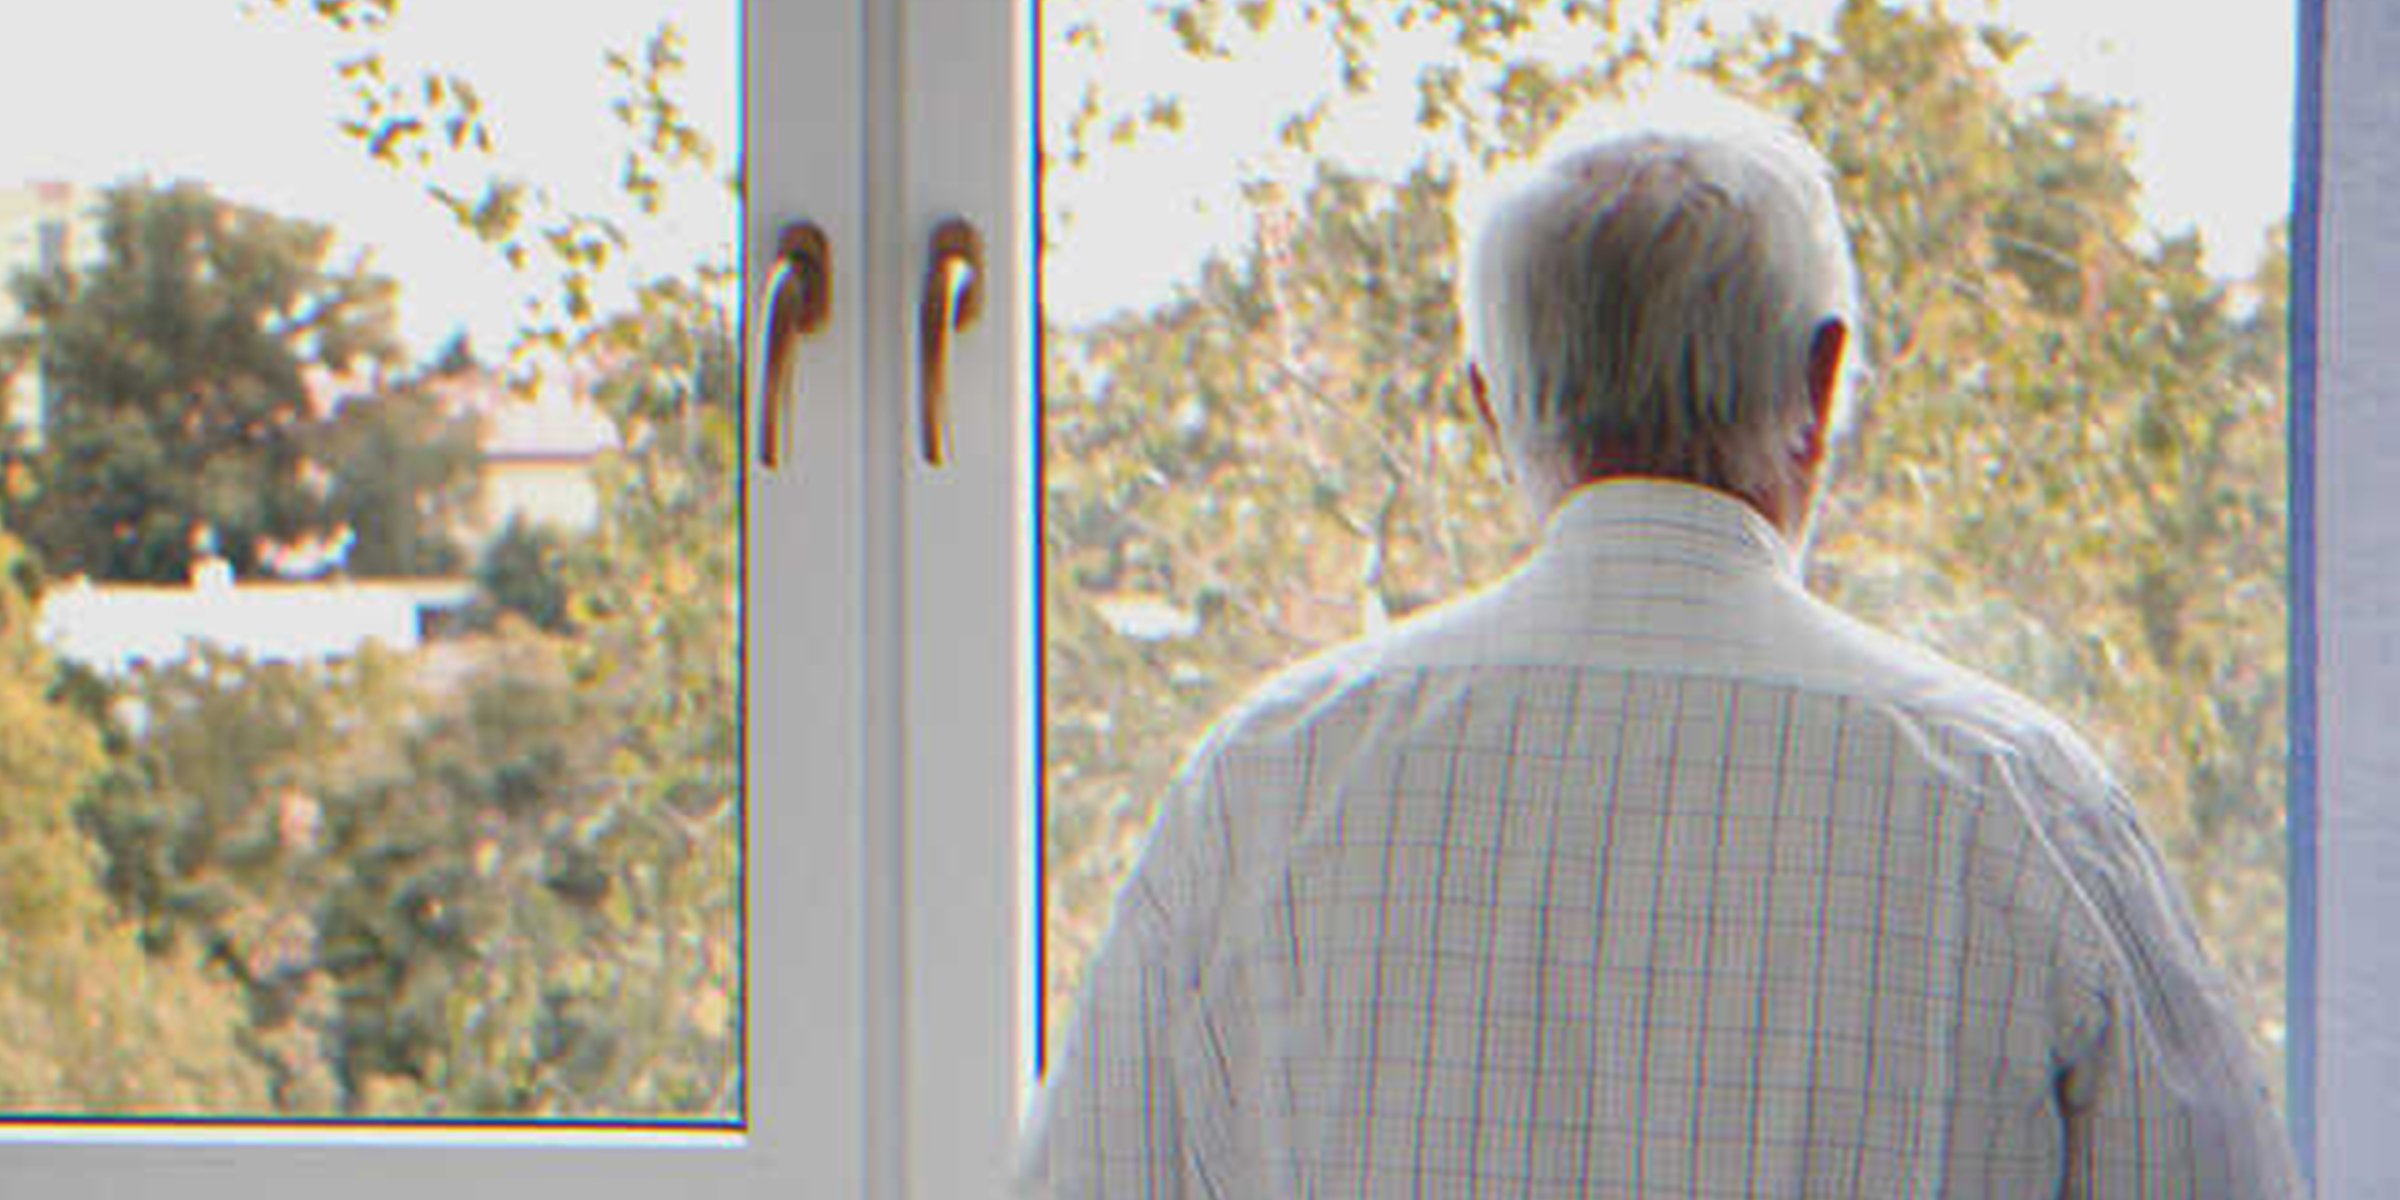 An old man looking out a window | Source: Shutterstock